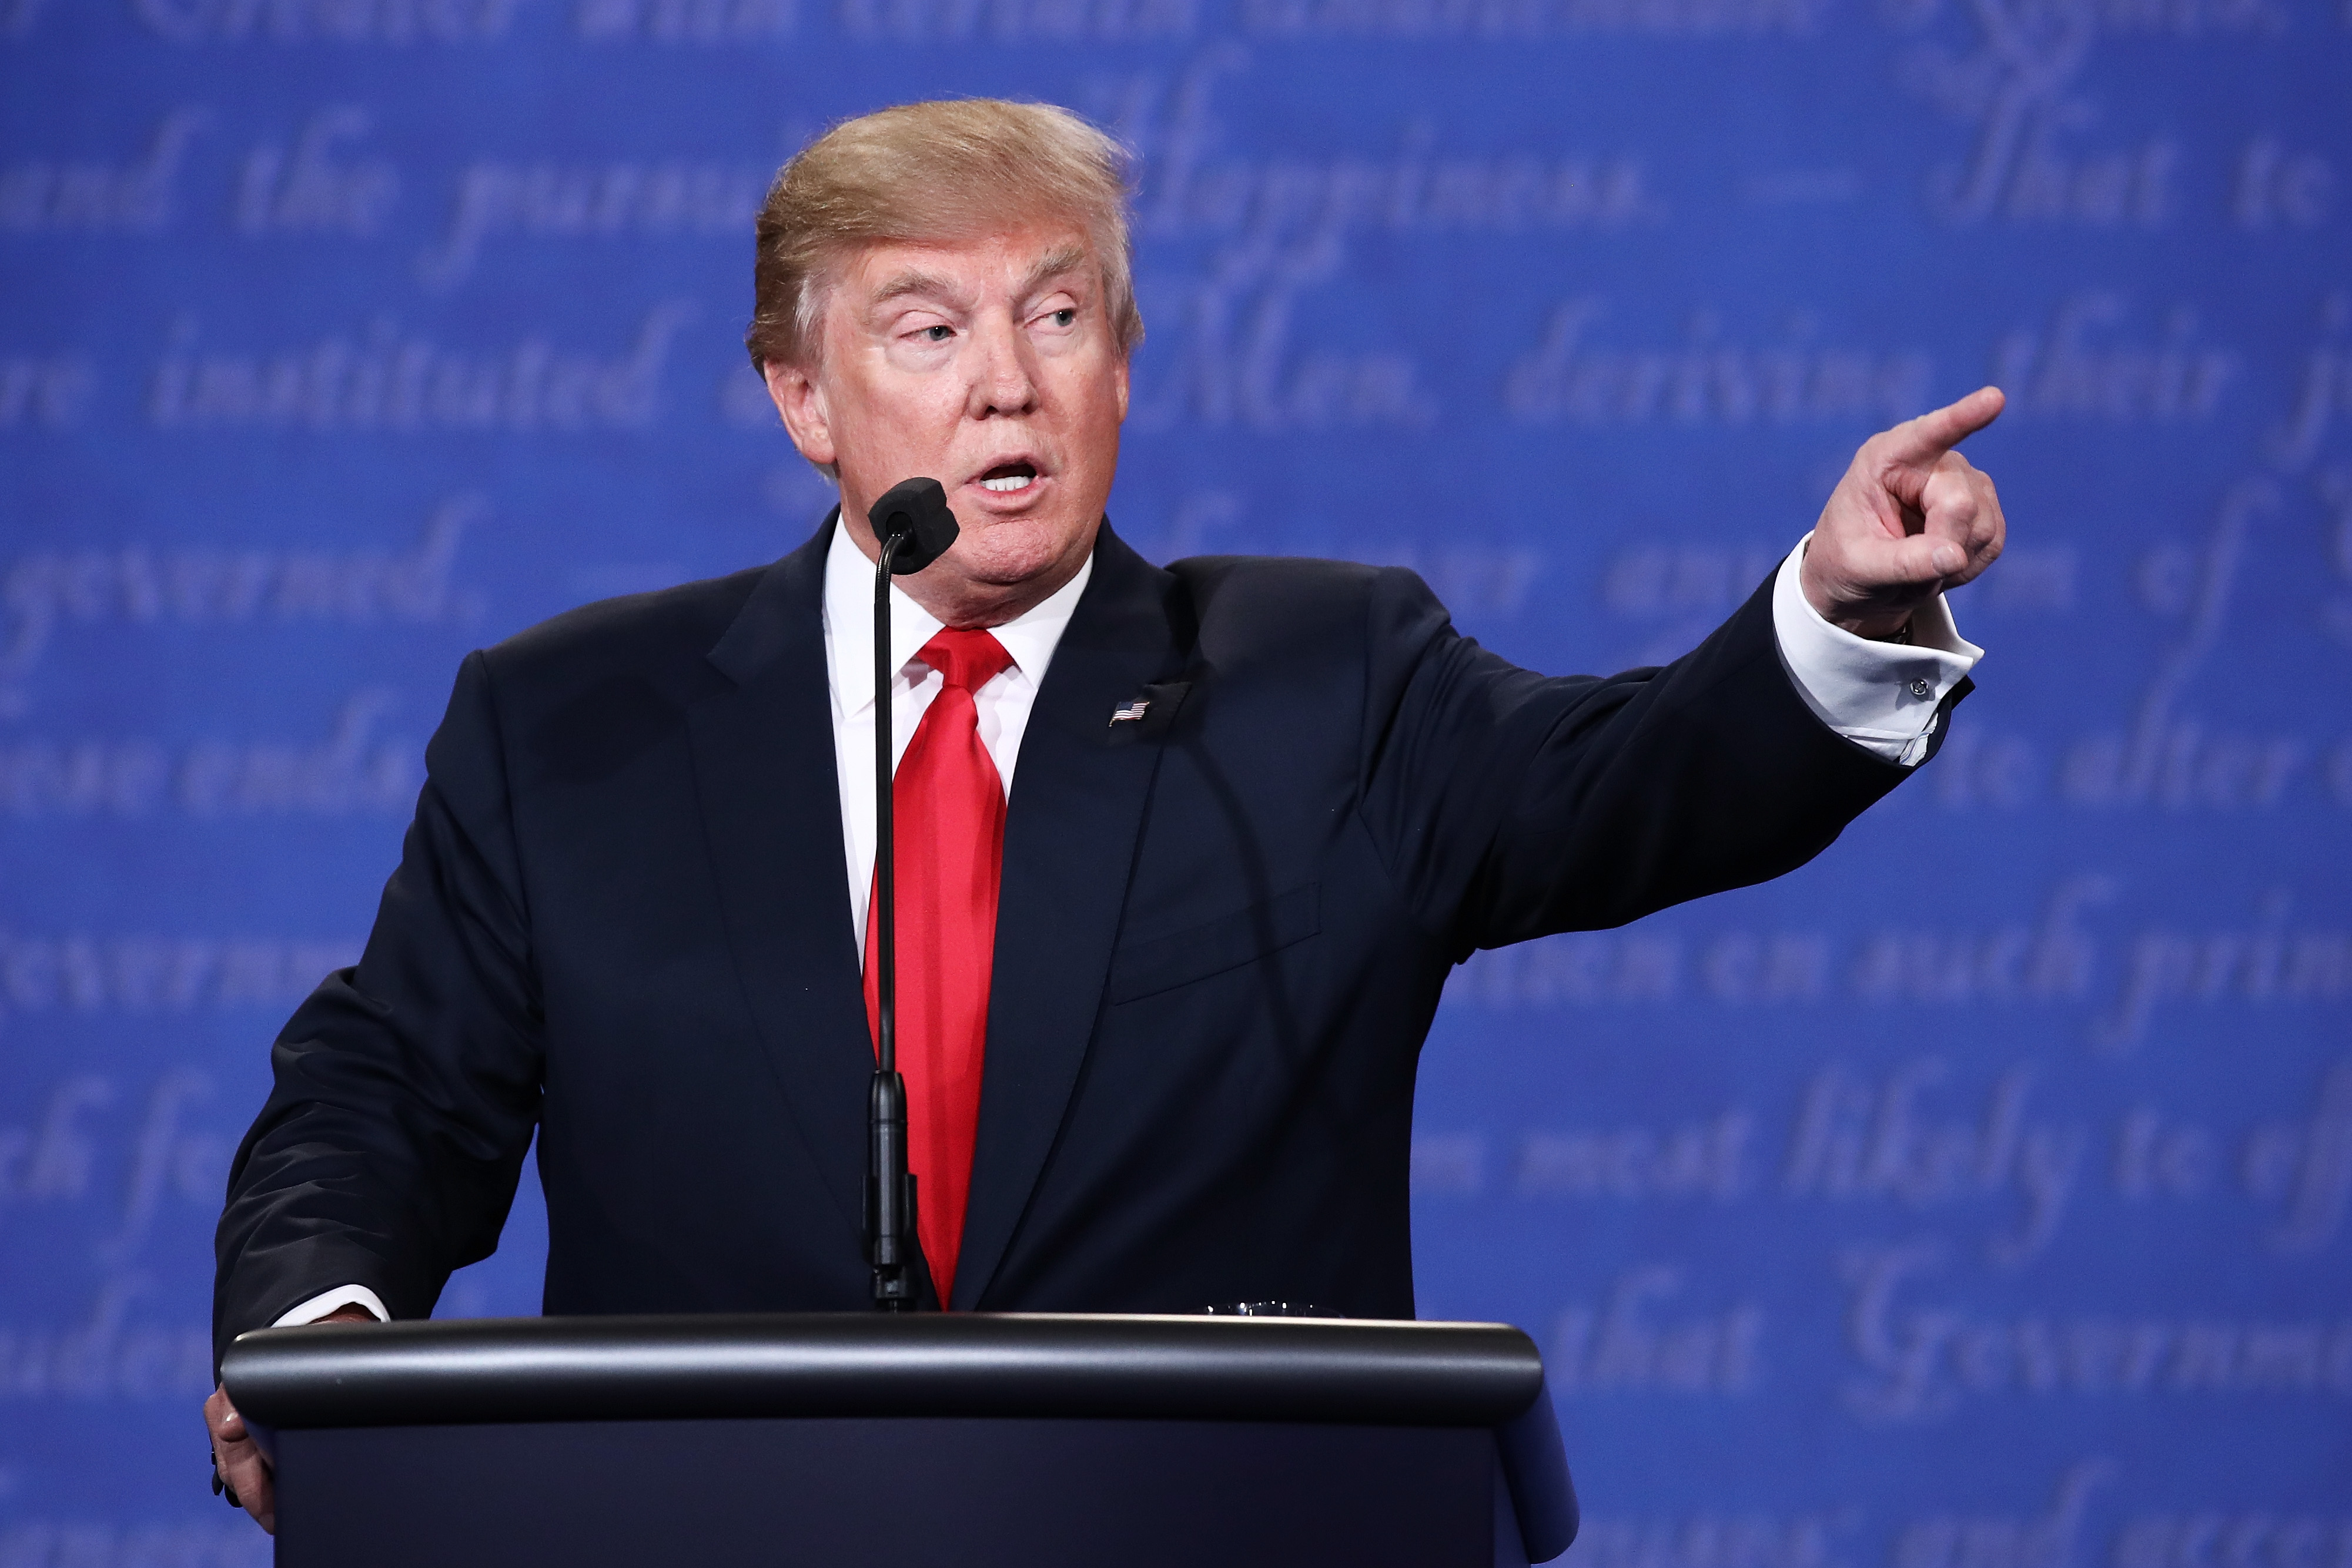 LAS VEGAS, NV - OCTOBER 19: Republican presidential nominee Donald Trump gestures as he speaks during the third U.S. presidential debate at the Thomas & Mack Center on October 19, 2016 in Las Vegas, Nevada. Tonight is the final debate ahead of Election Day on November 8.   Win McNamee/Getty Images/AFP